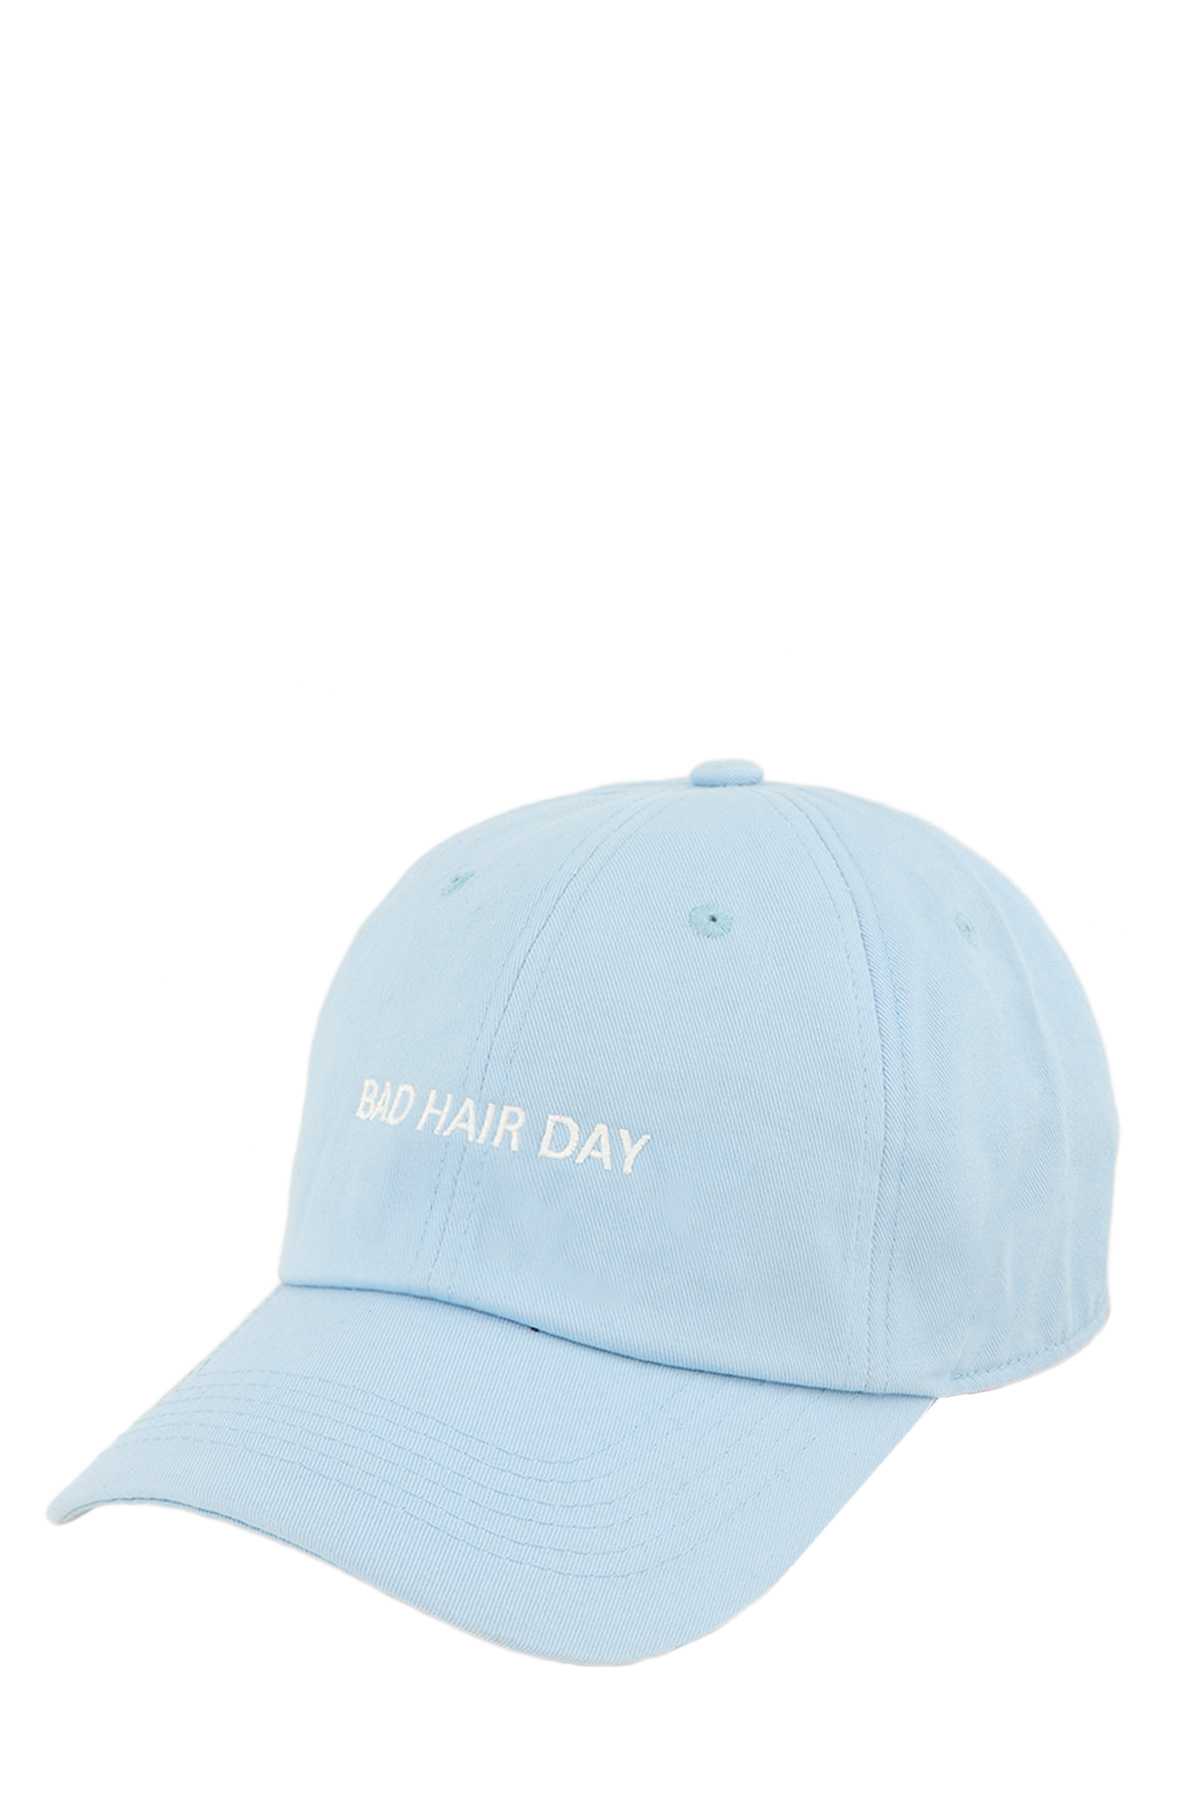 BAD HAIR DAY Embroidered Cotton Baseball Cap